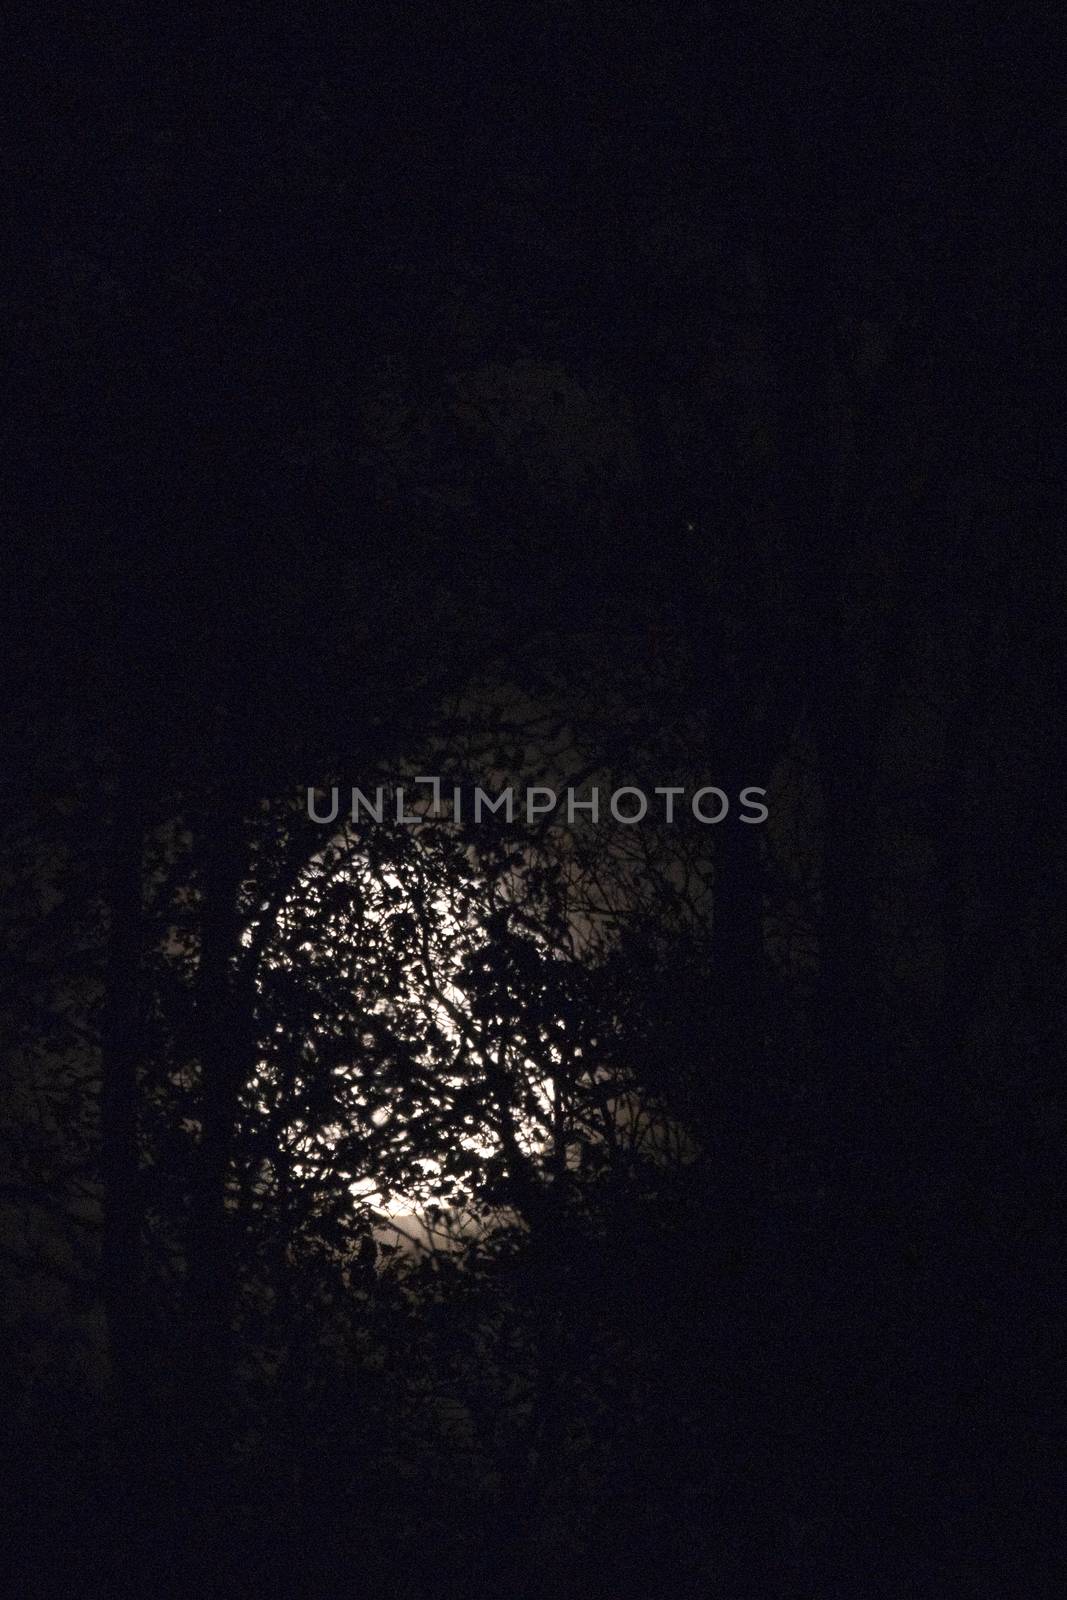 Full moon behind naked tree branches and twigs in night by asafaric